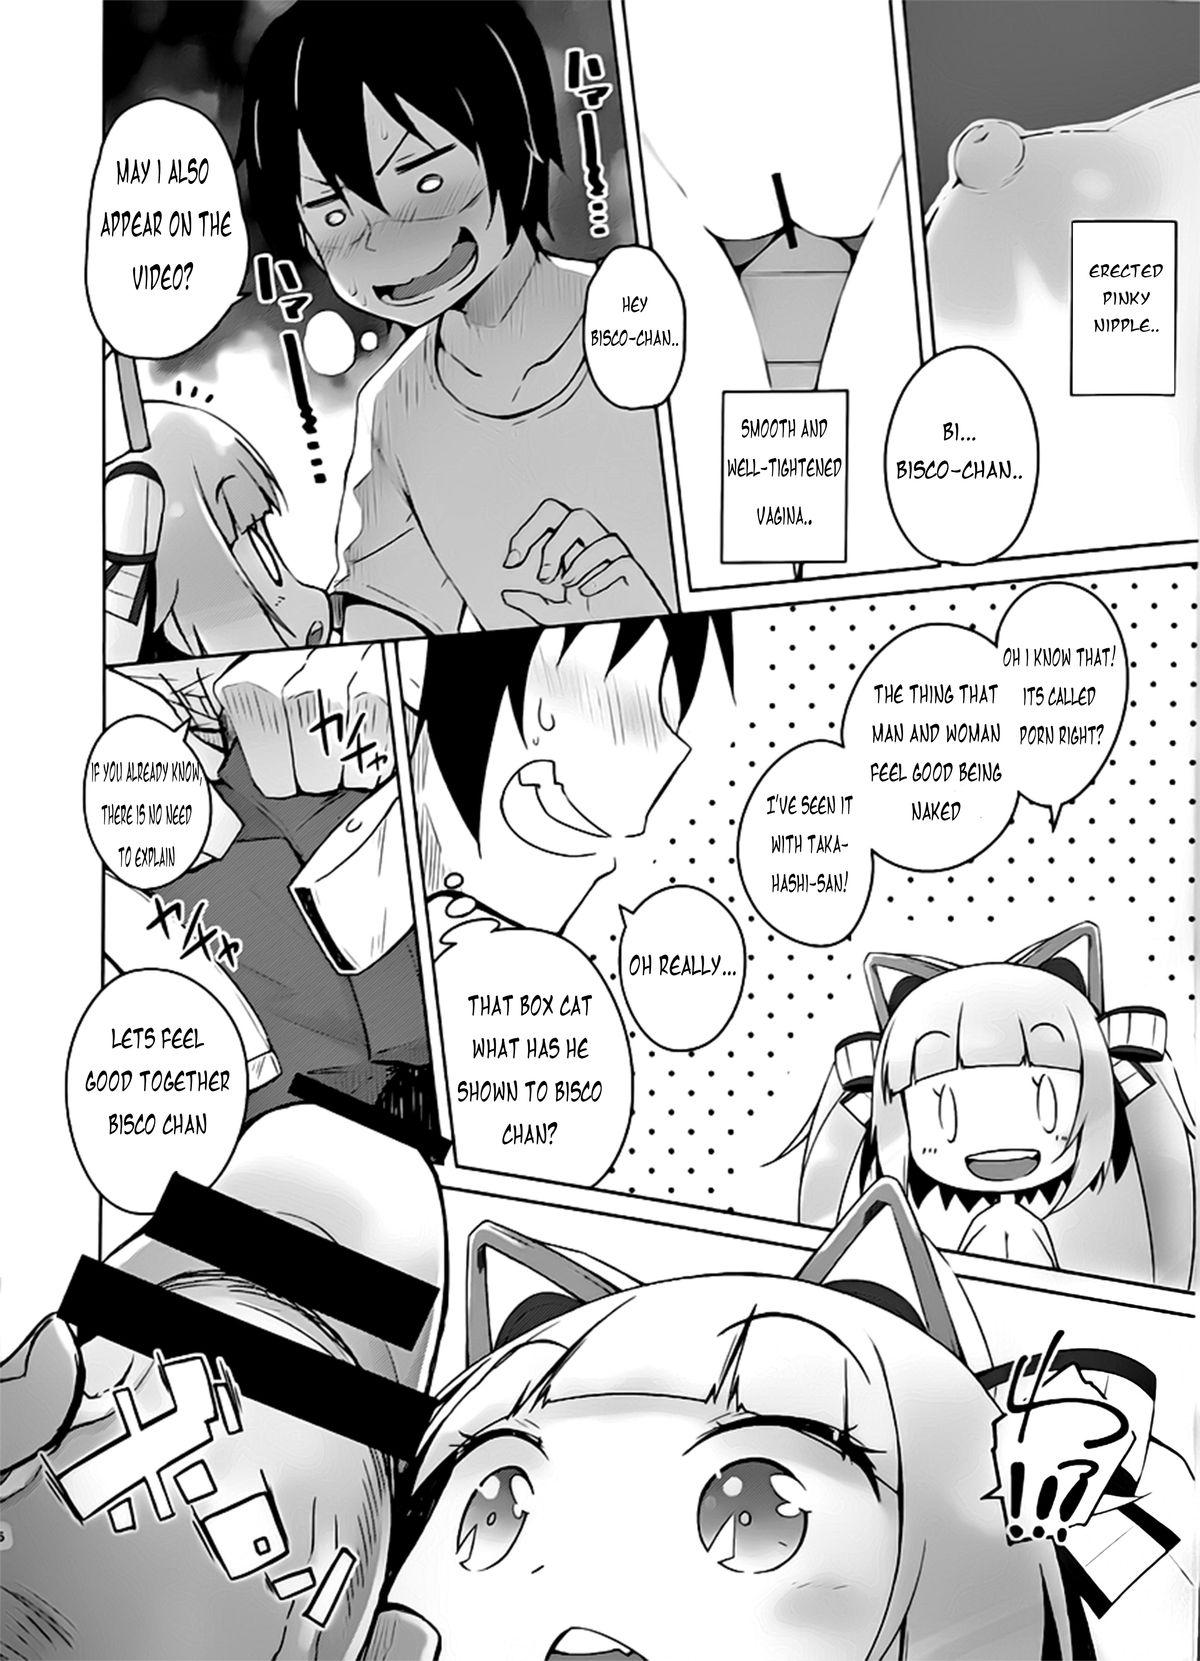 Girls Getting Fucked Honey Biscuits! - Beatstream Rough Sex - Page 5